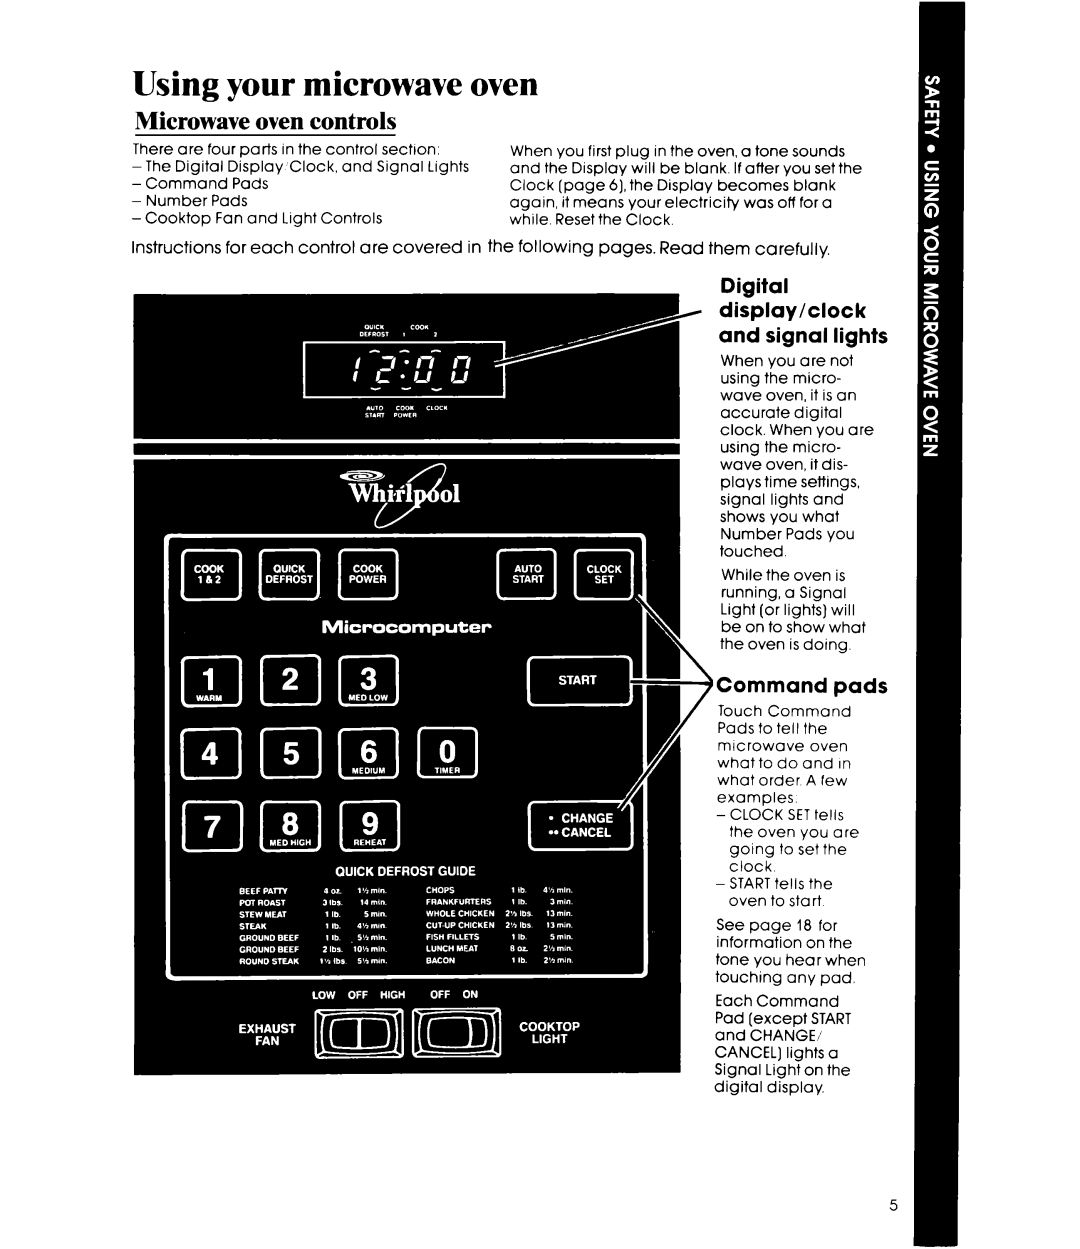 Whirlpool MH6600XM manual Using your microwave oven, Microwave oven controls, Command pads 